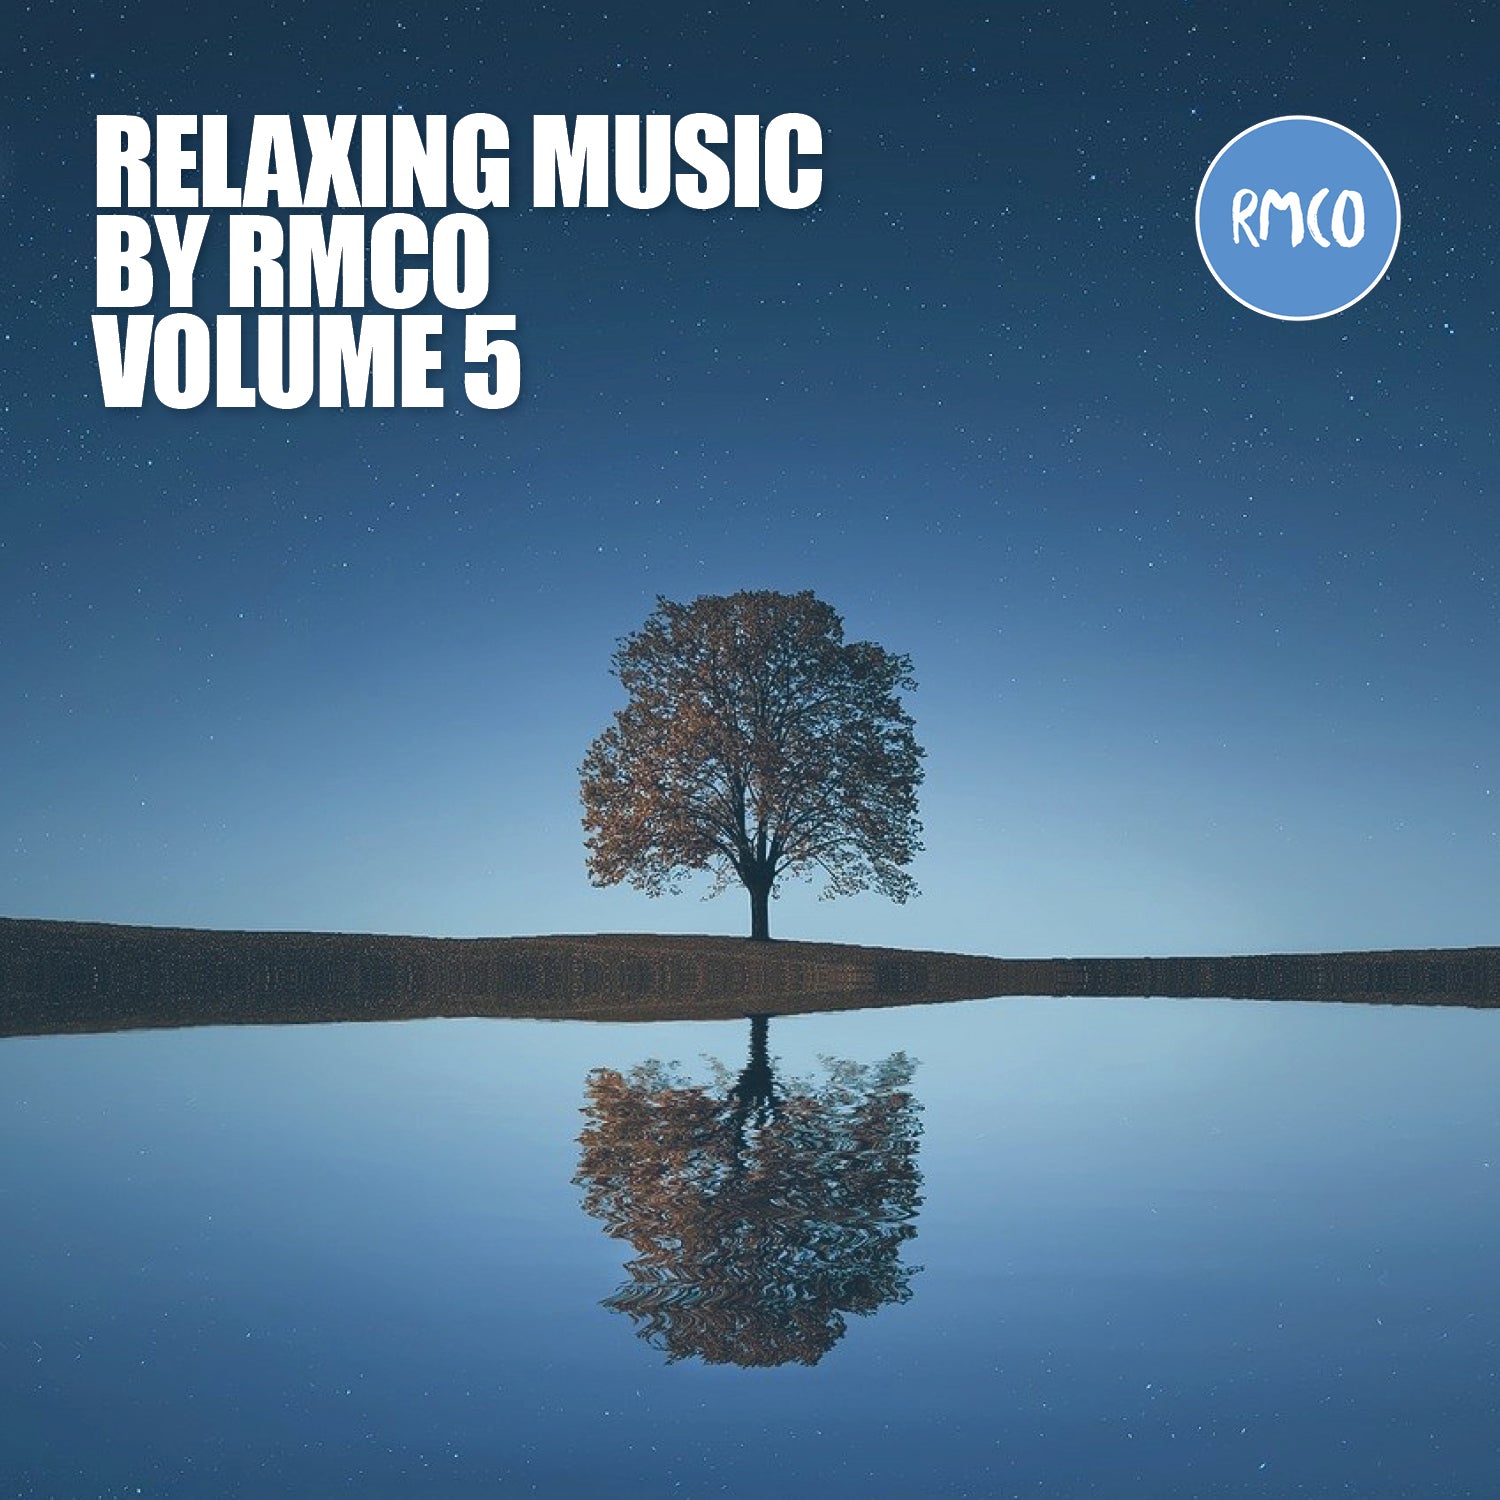 Relaxing Music, Vol. 5 by RMCO